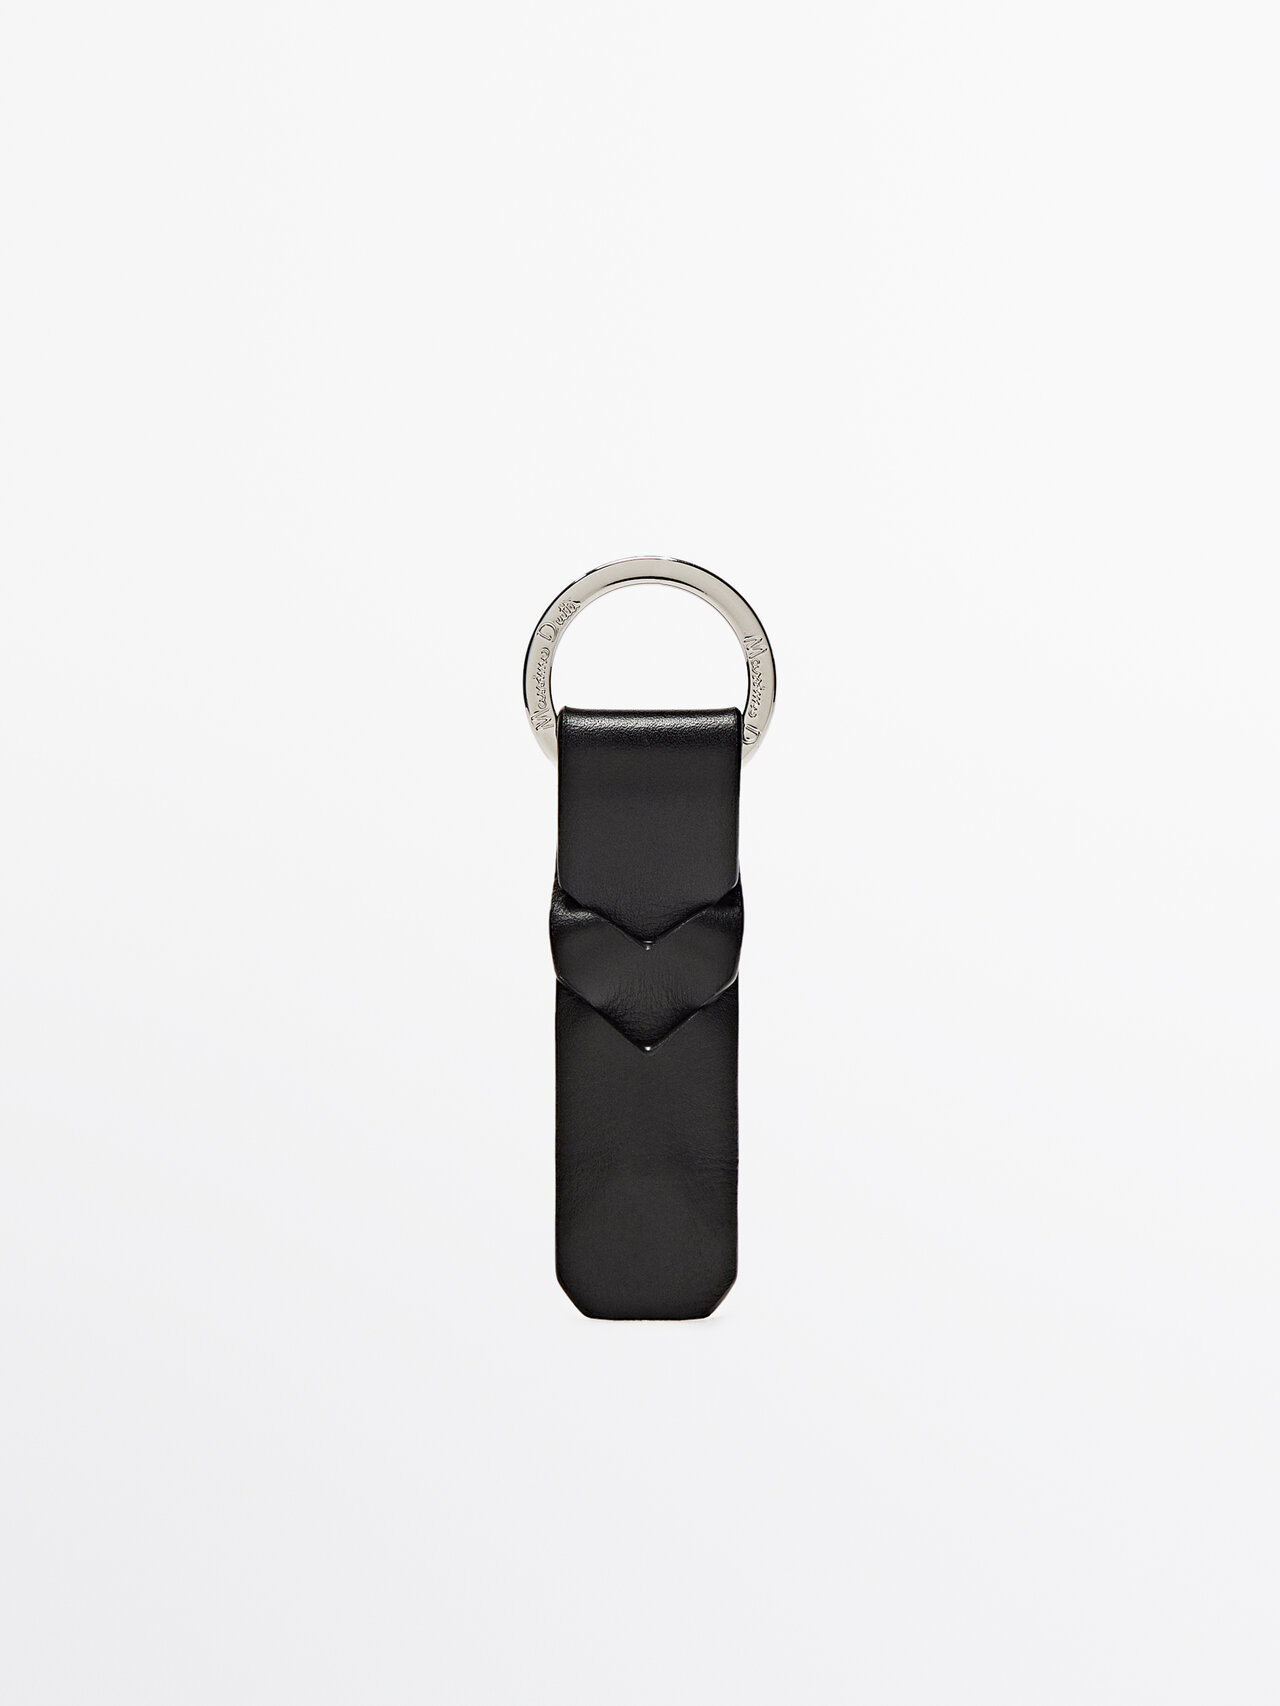 Massimo Dutti Leather Keyring In Black